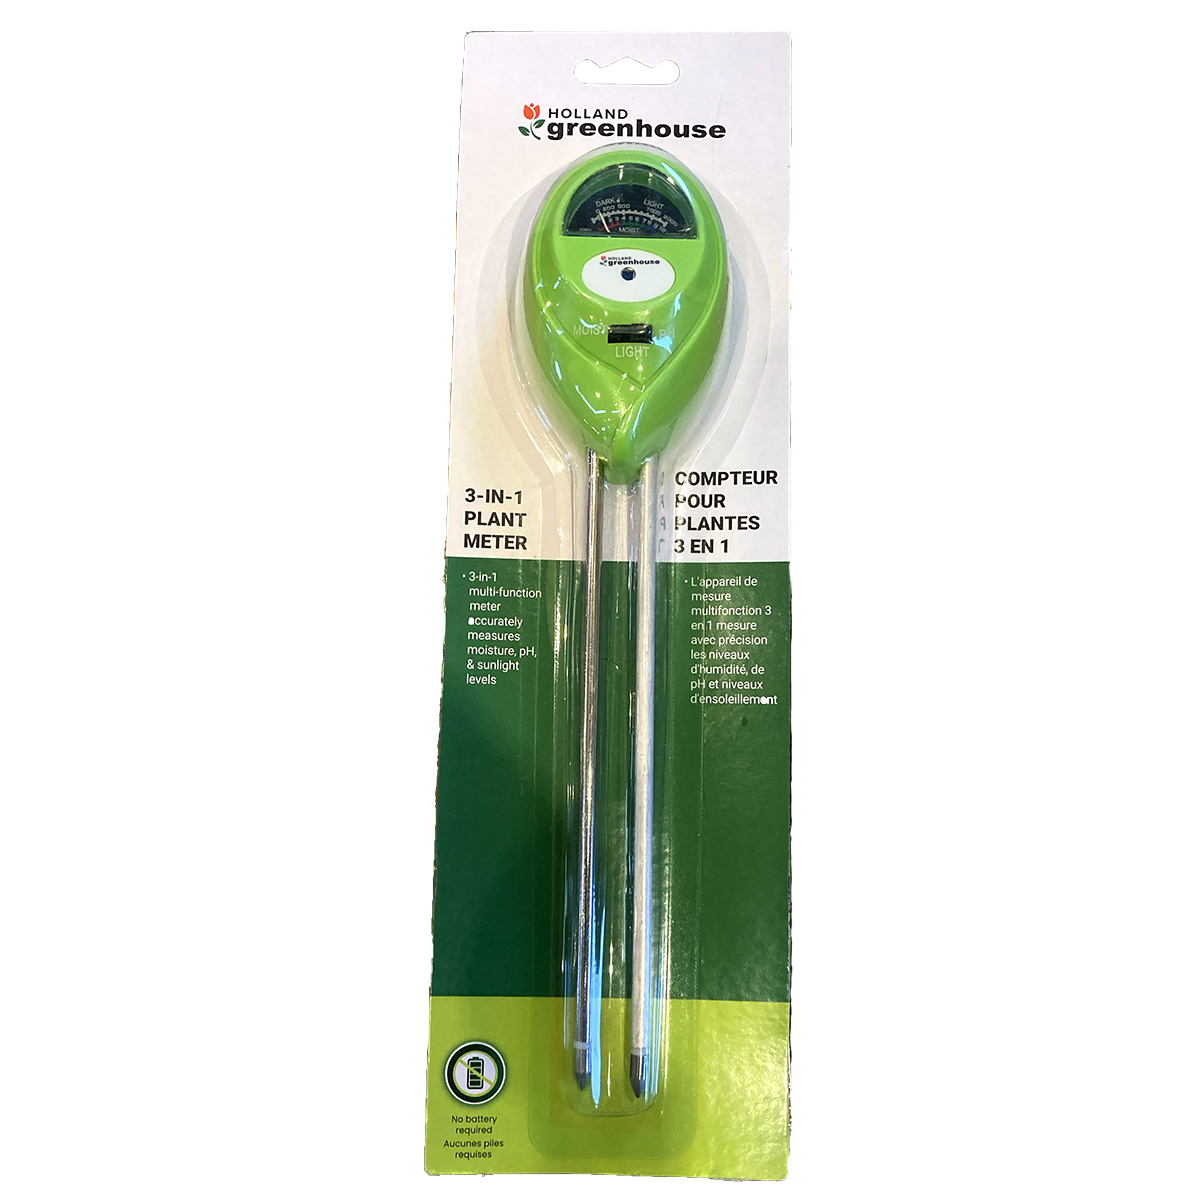 Holland Greenhouse 3 in 1 Plant Meter